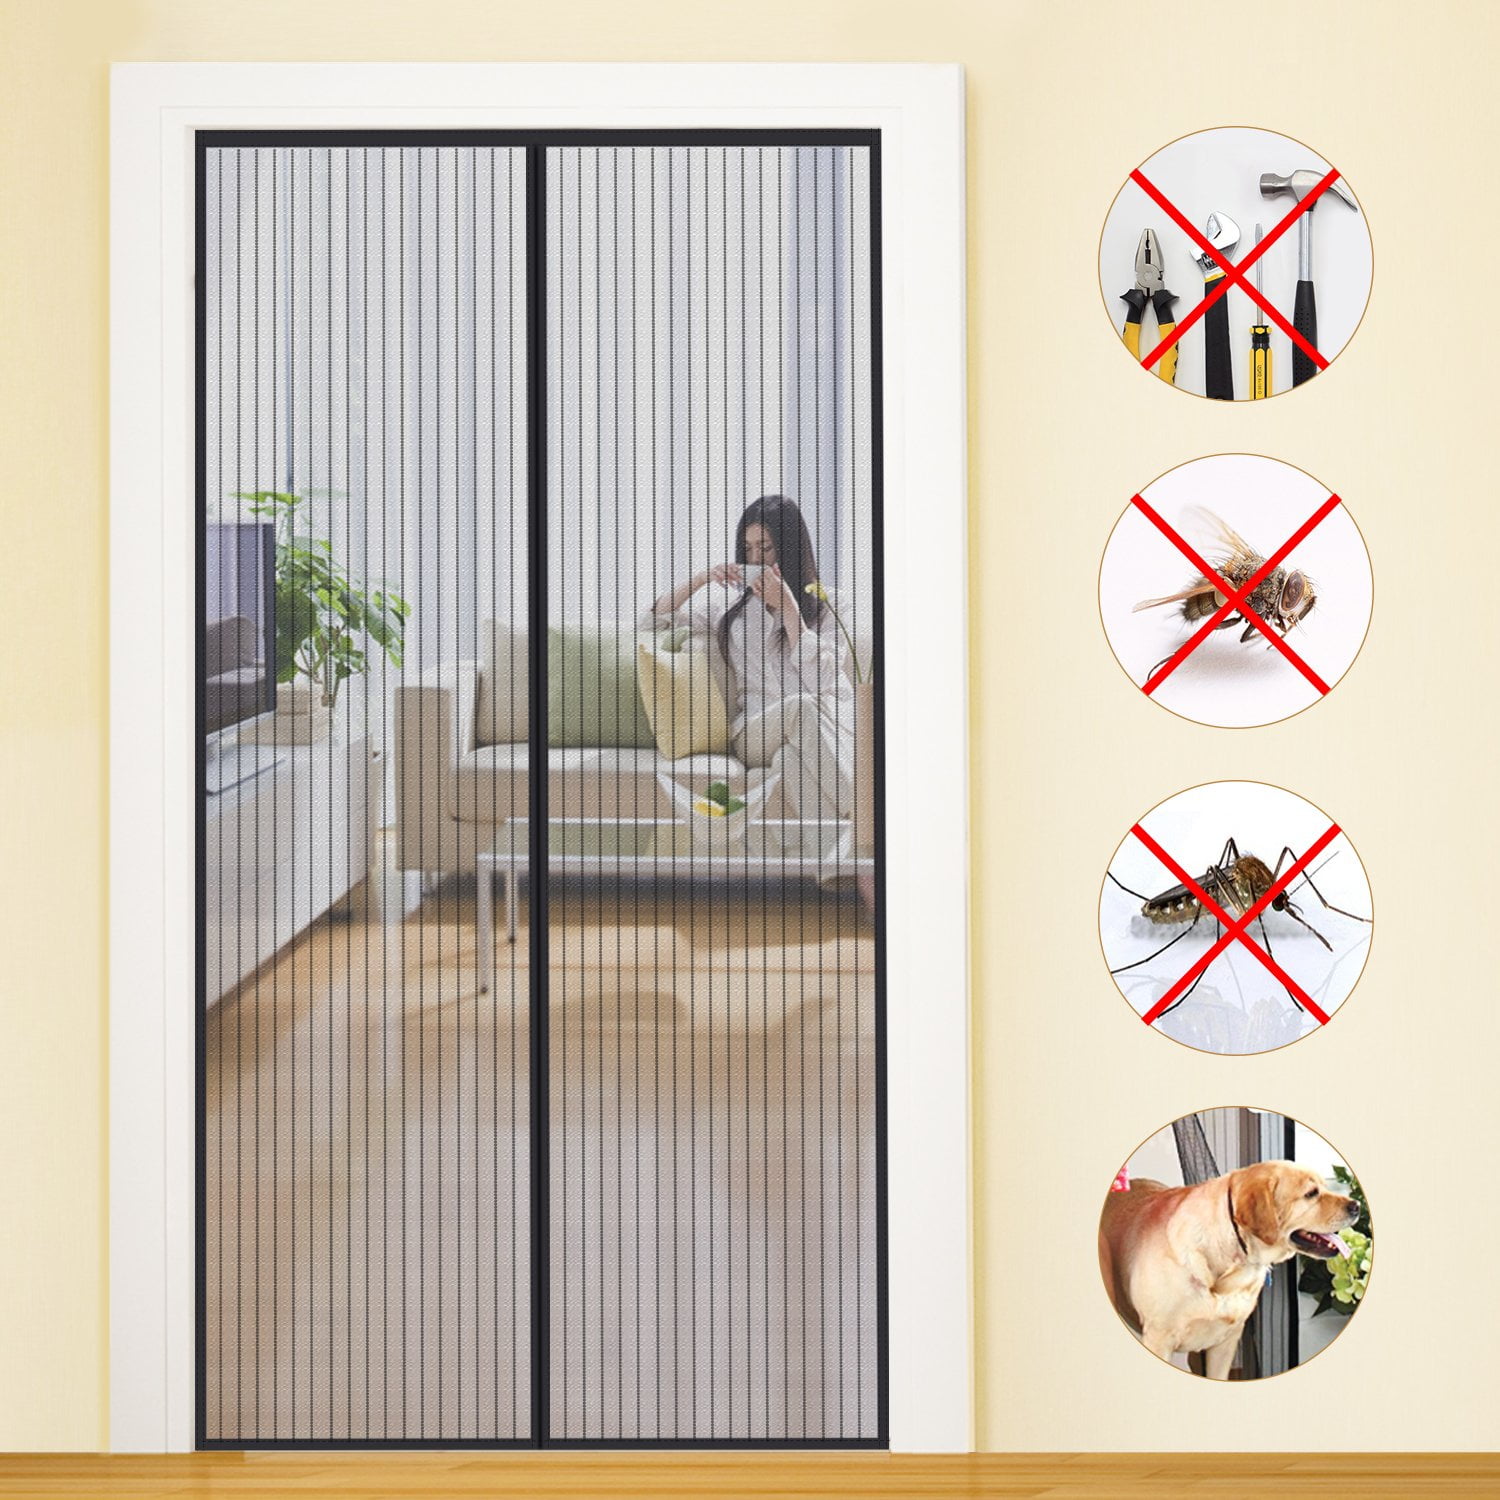 3 X DOOR MESH MAGNETIC MAGIC CURTAIN FASTENING MOSQUITO FLY INSECT NET SCREEN 